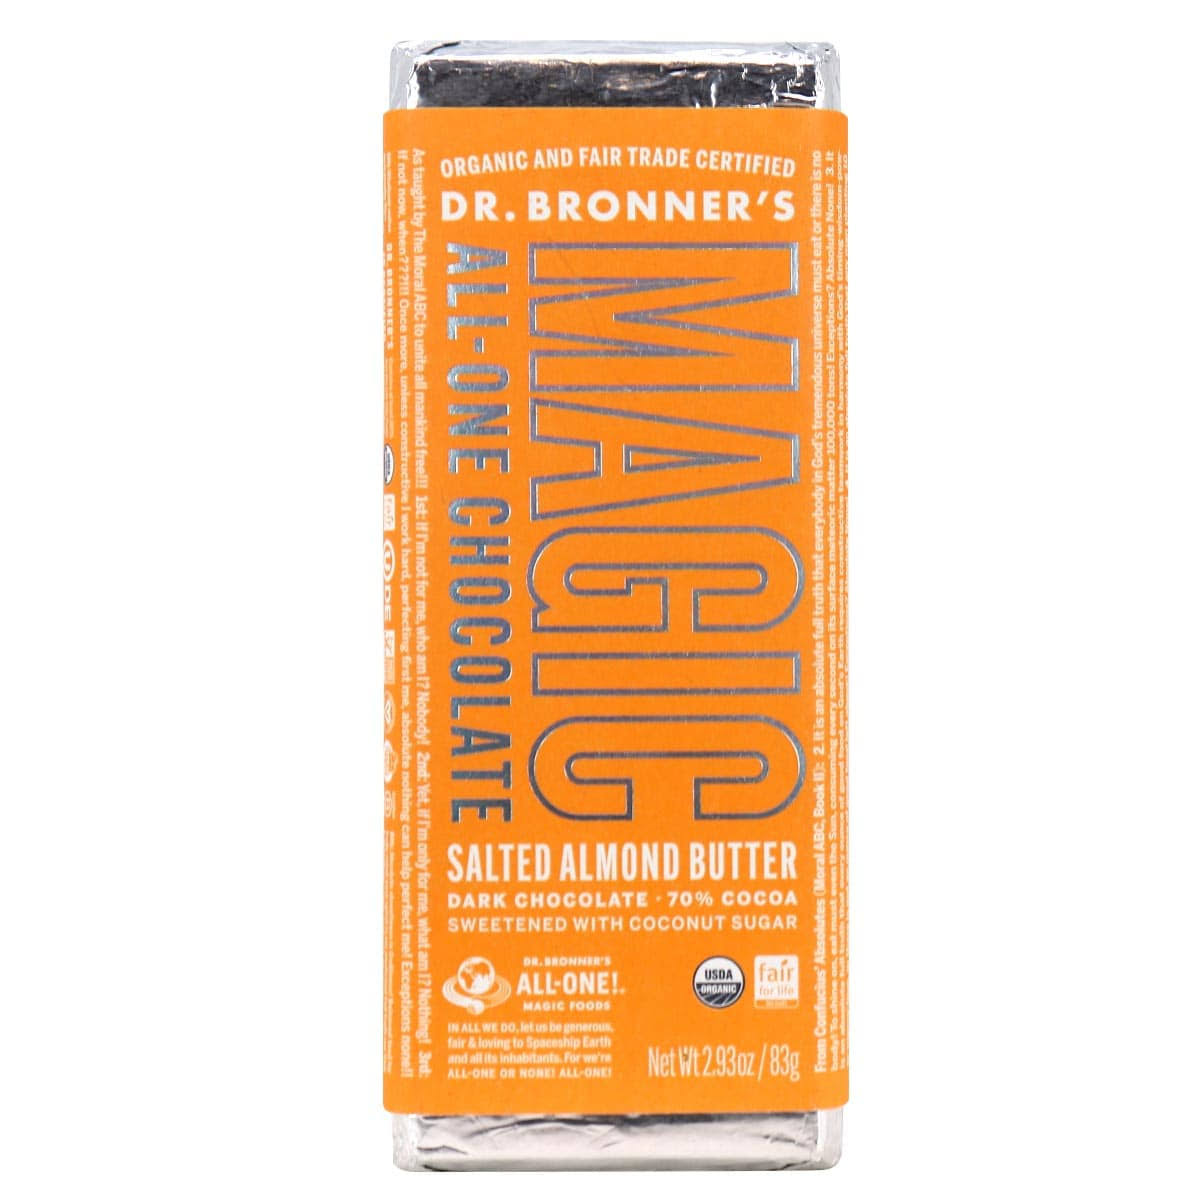 Dr. Bronner’s Fair Trade Magic All-One Chocolate Salted Almond Butter, 83g